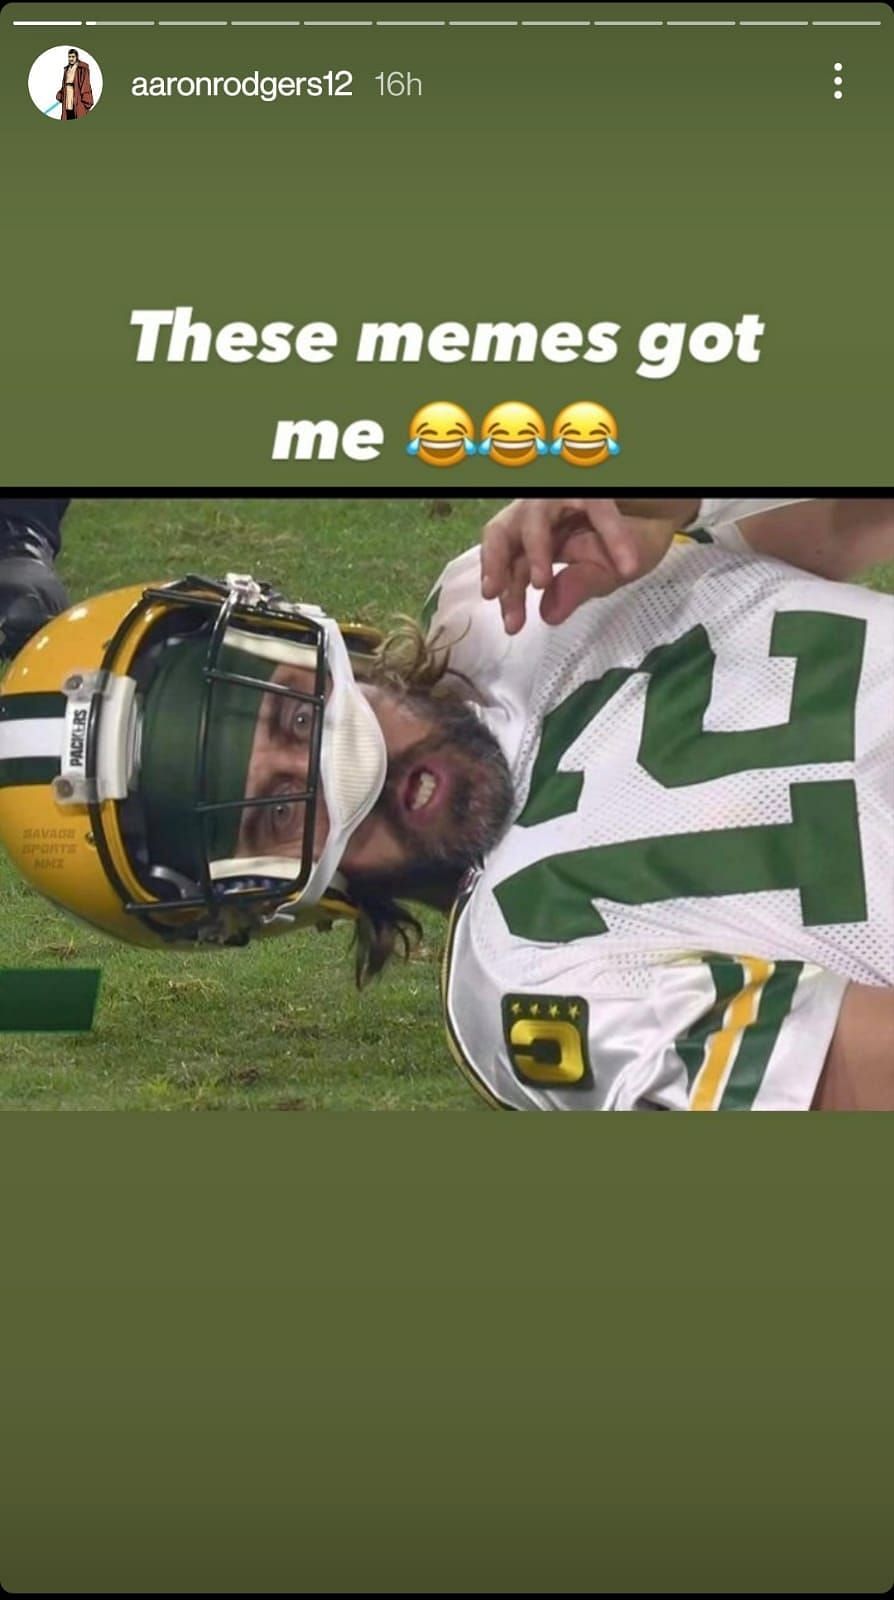 Rodgers clearly is a fan of the image